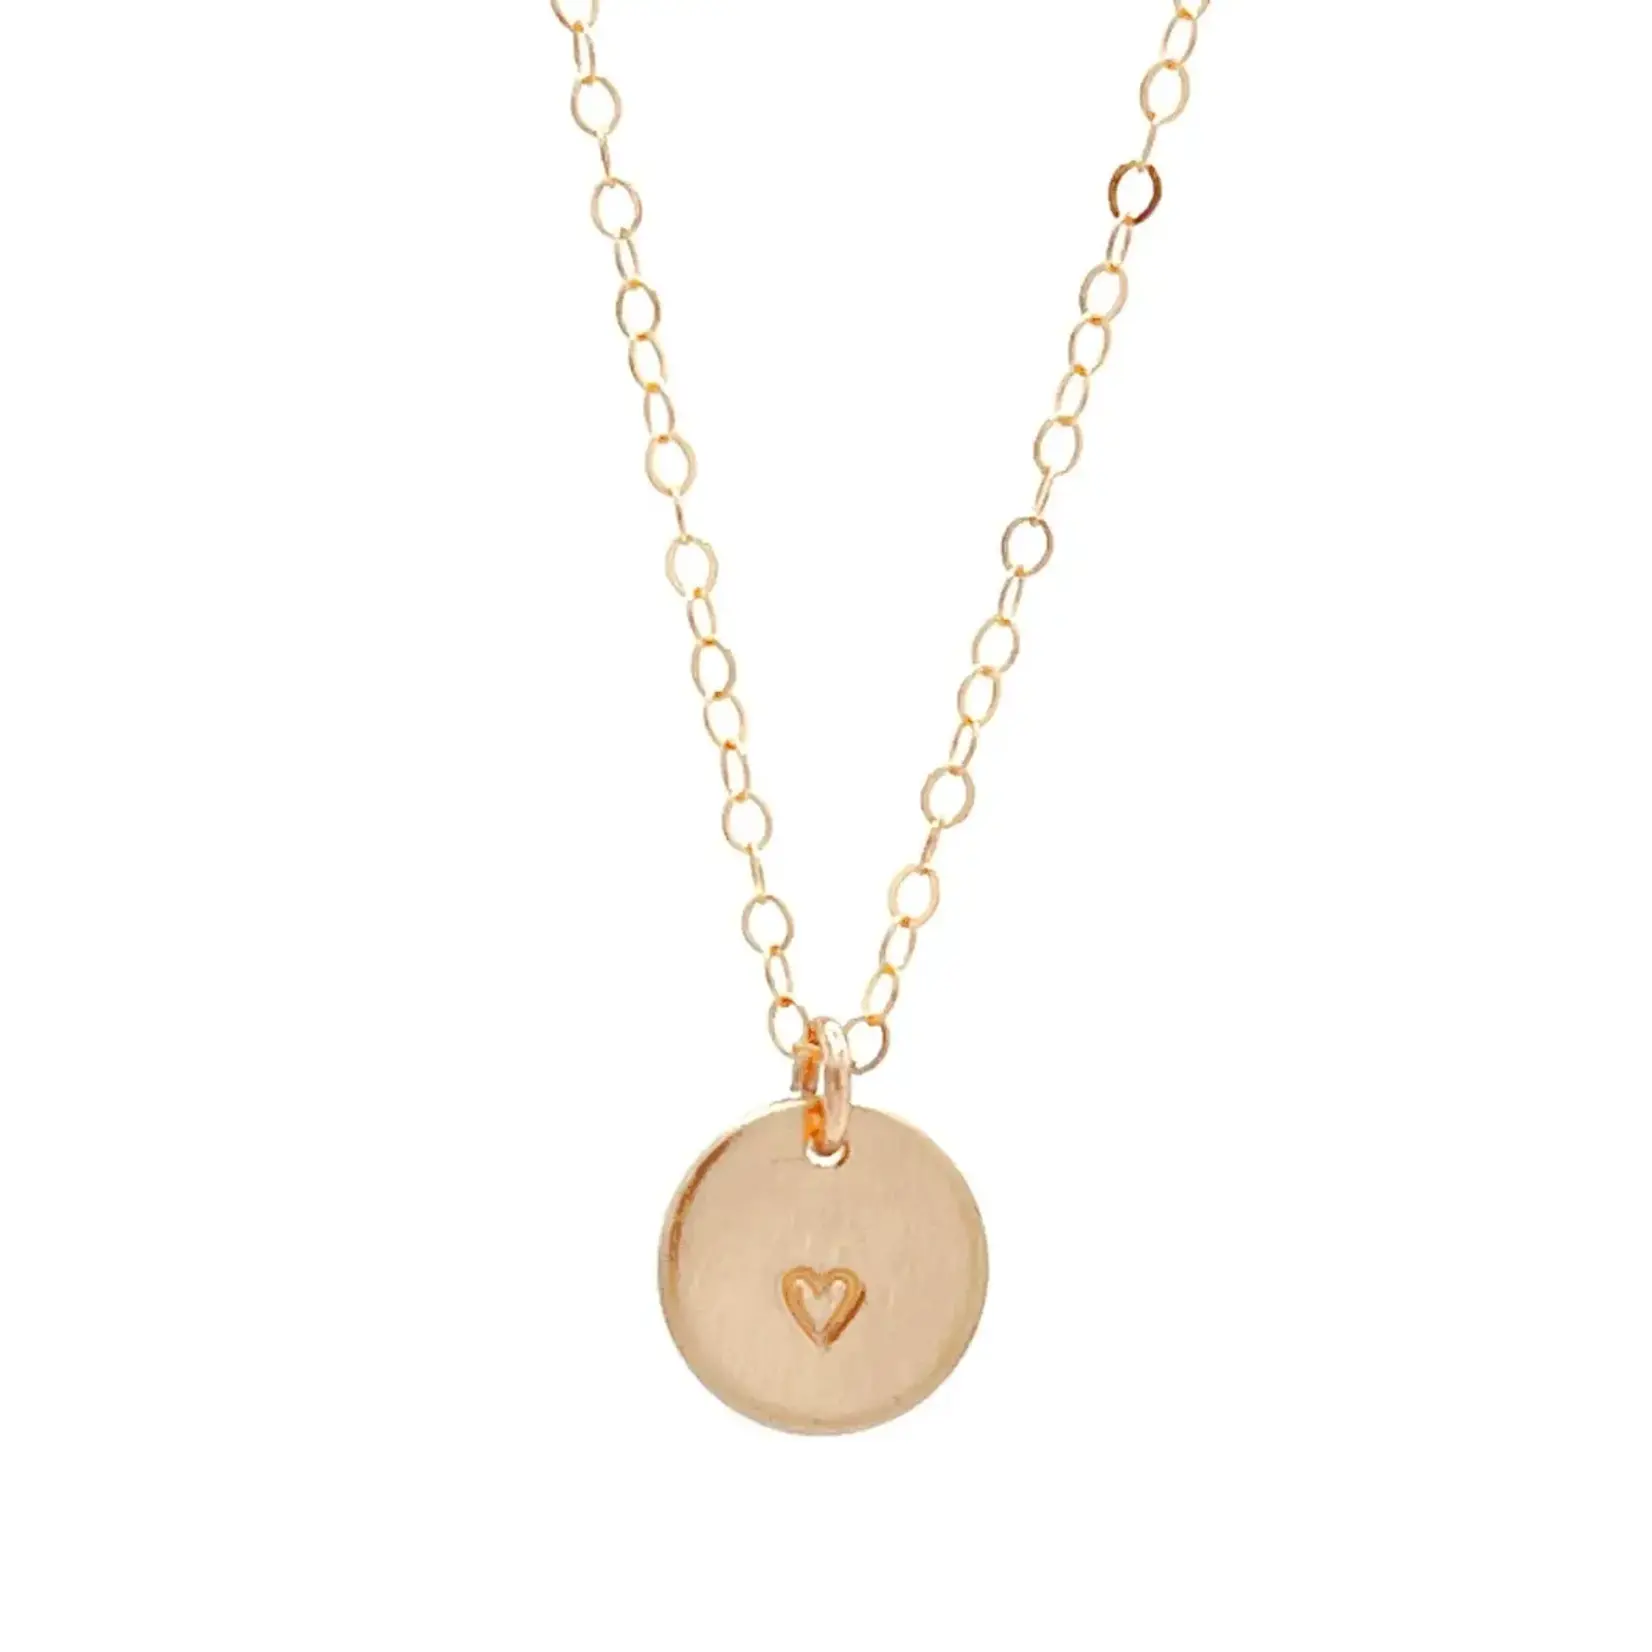 Barberry & Lace 14k Gold Filled Heart Disc Necklace